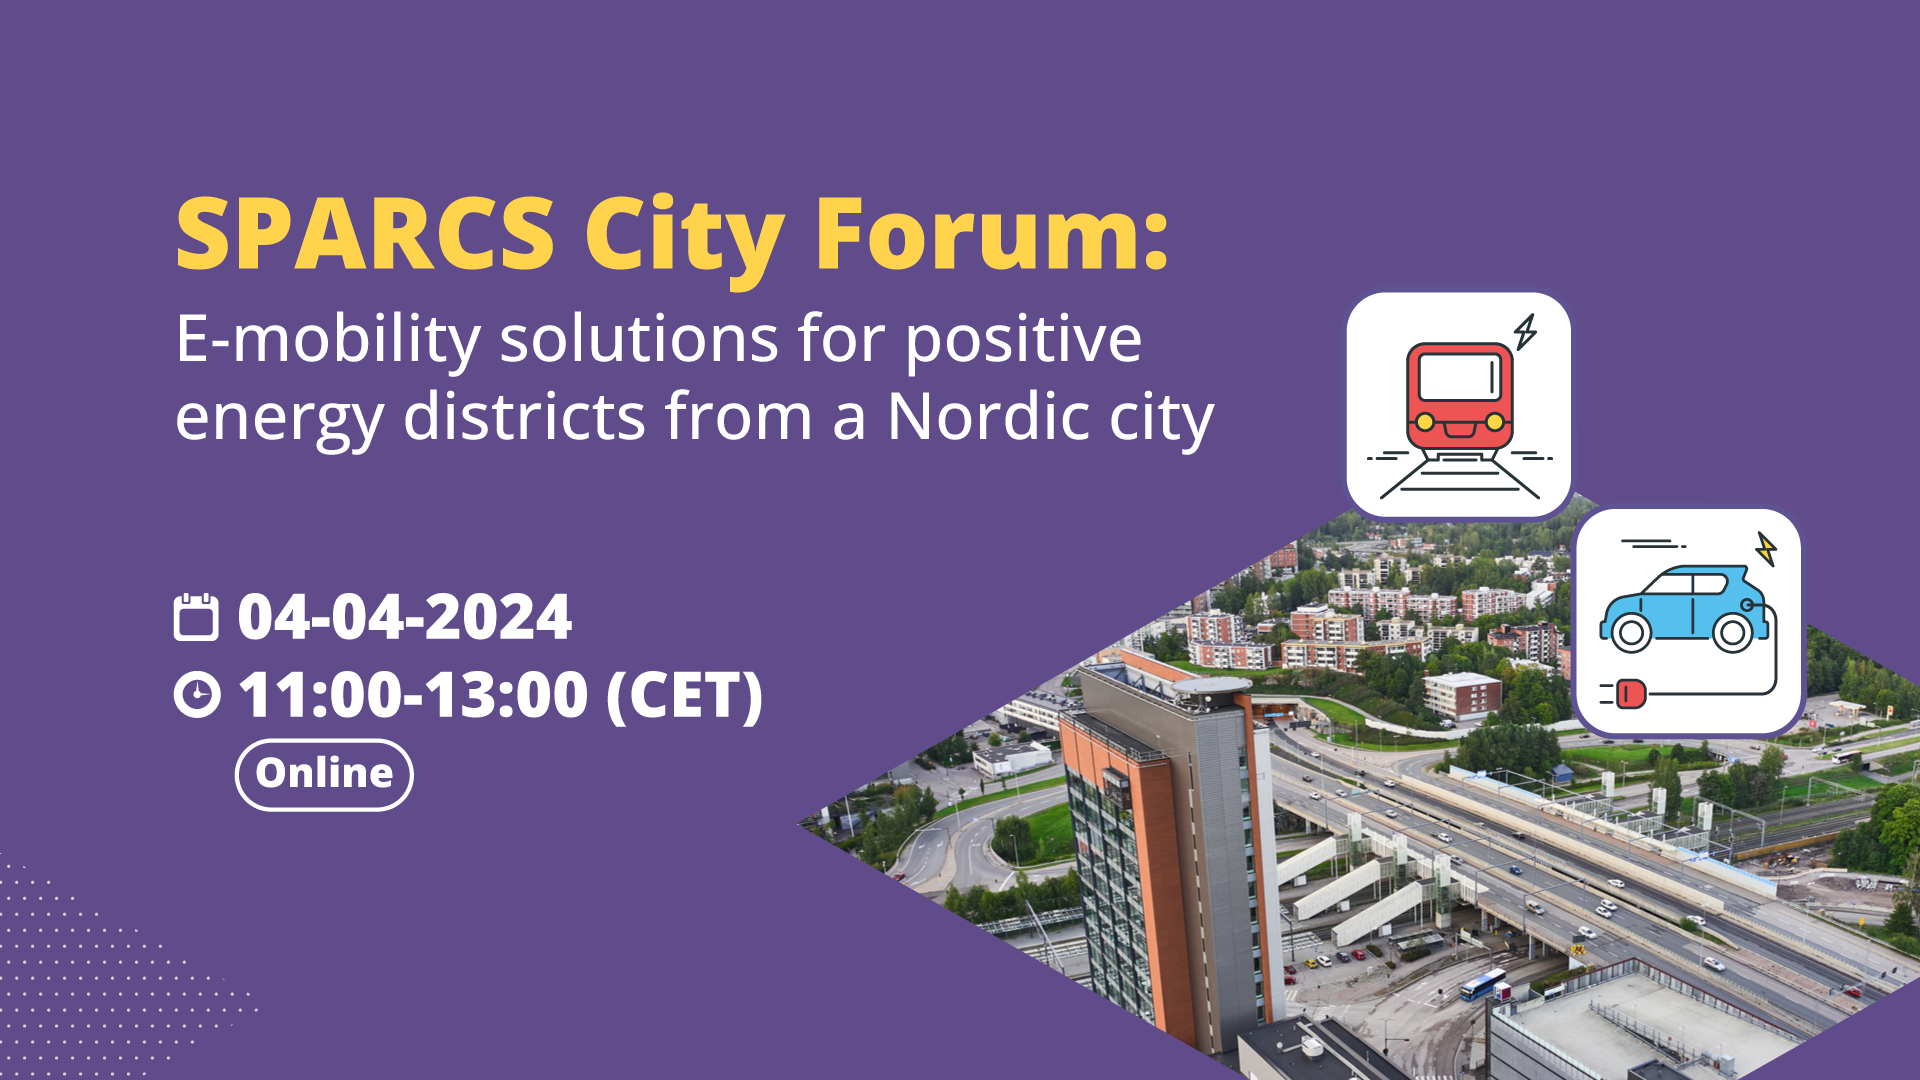 SPARCS City Forum: E-mobility solutions for PEDs from Nordic city